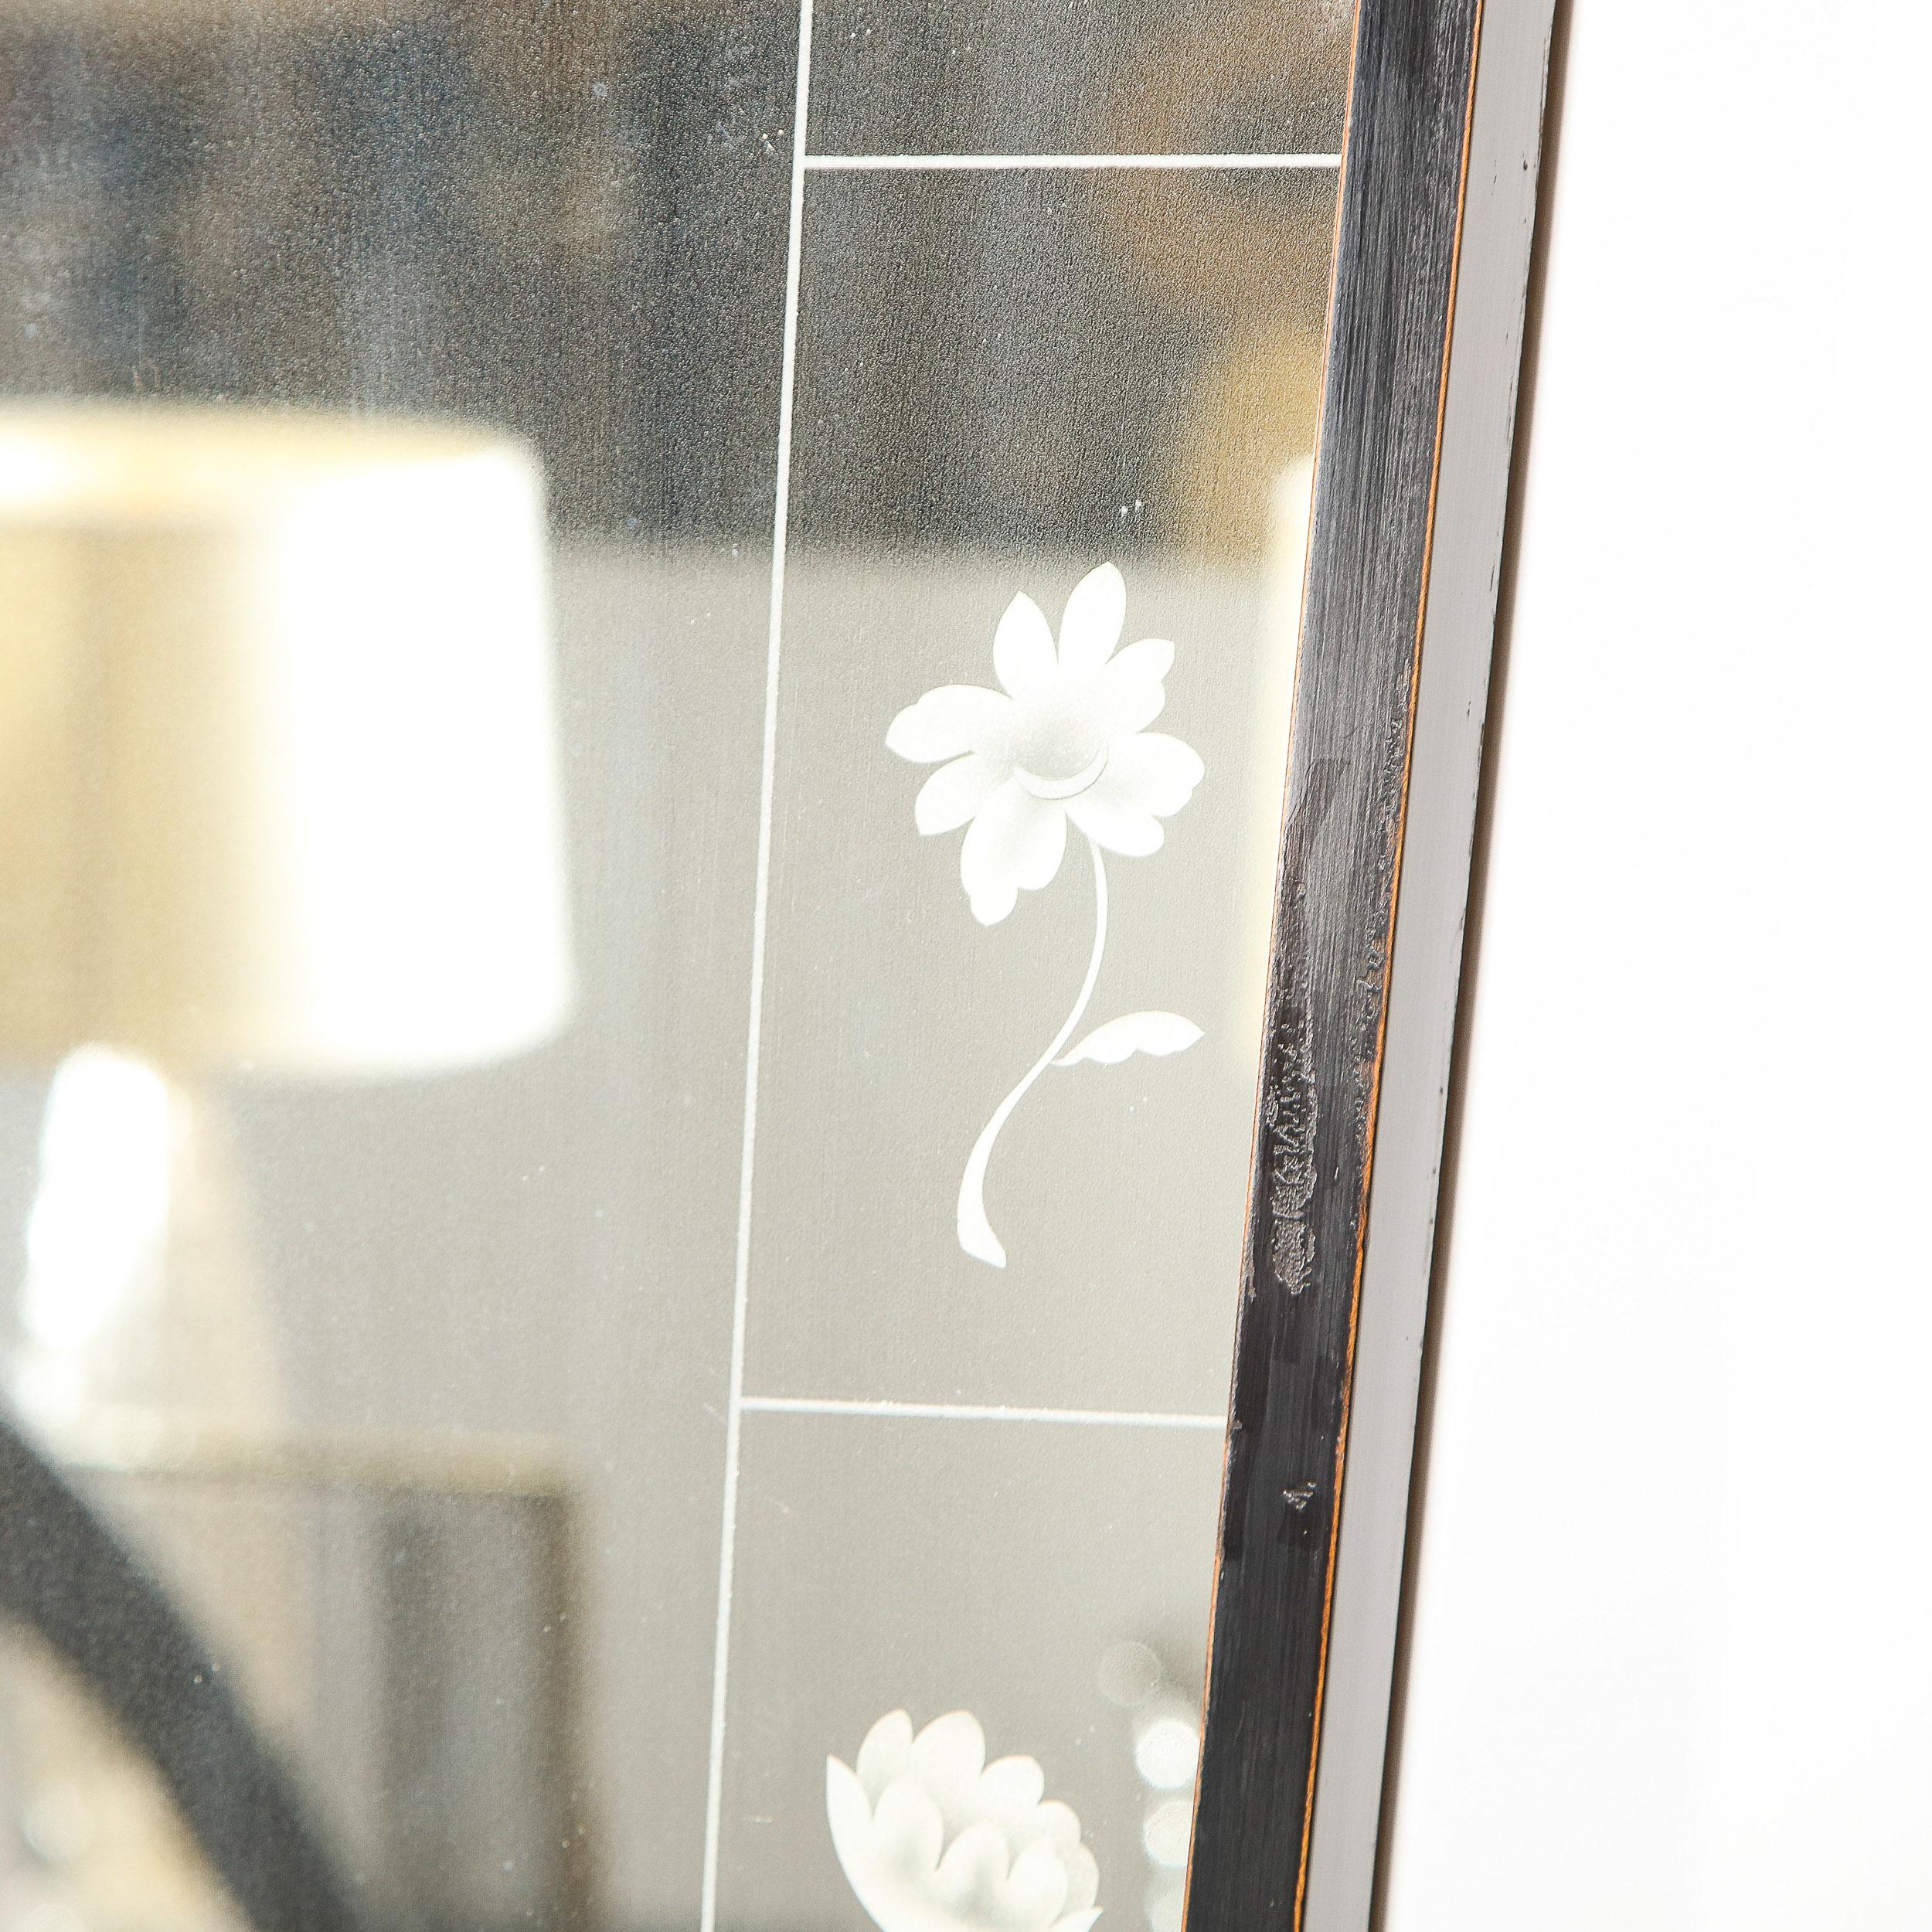 Mid-20th Century Art Deco Ebony Framed Mirror with Acid Etched Engraved Flowers by Luigi Brusotti For Sale